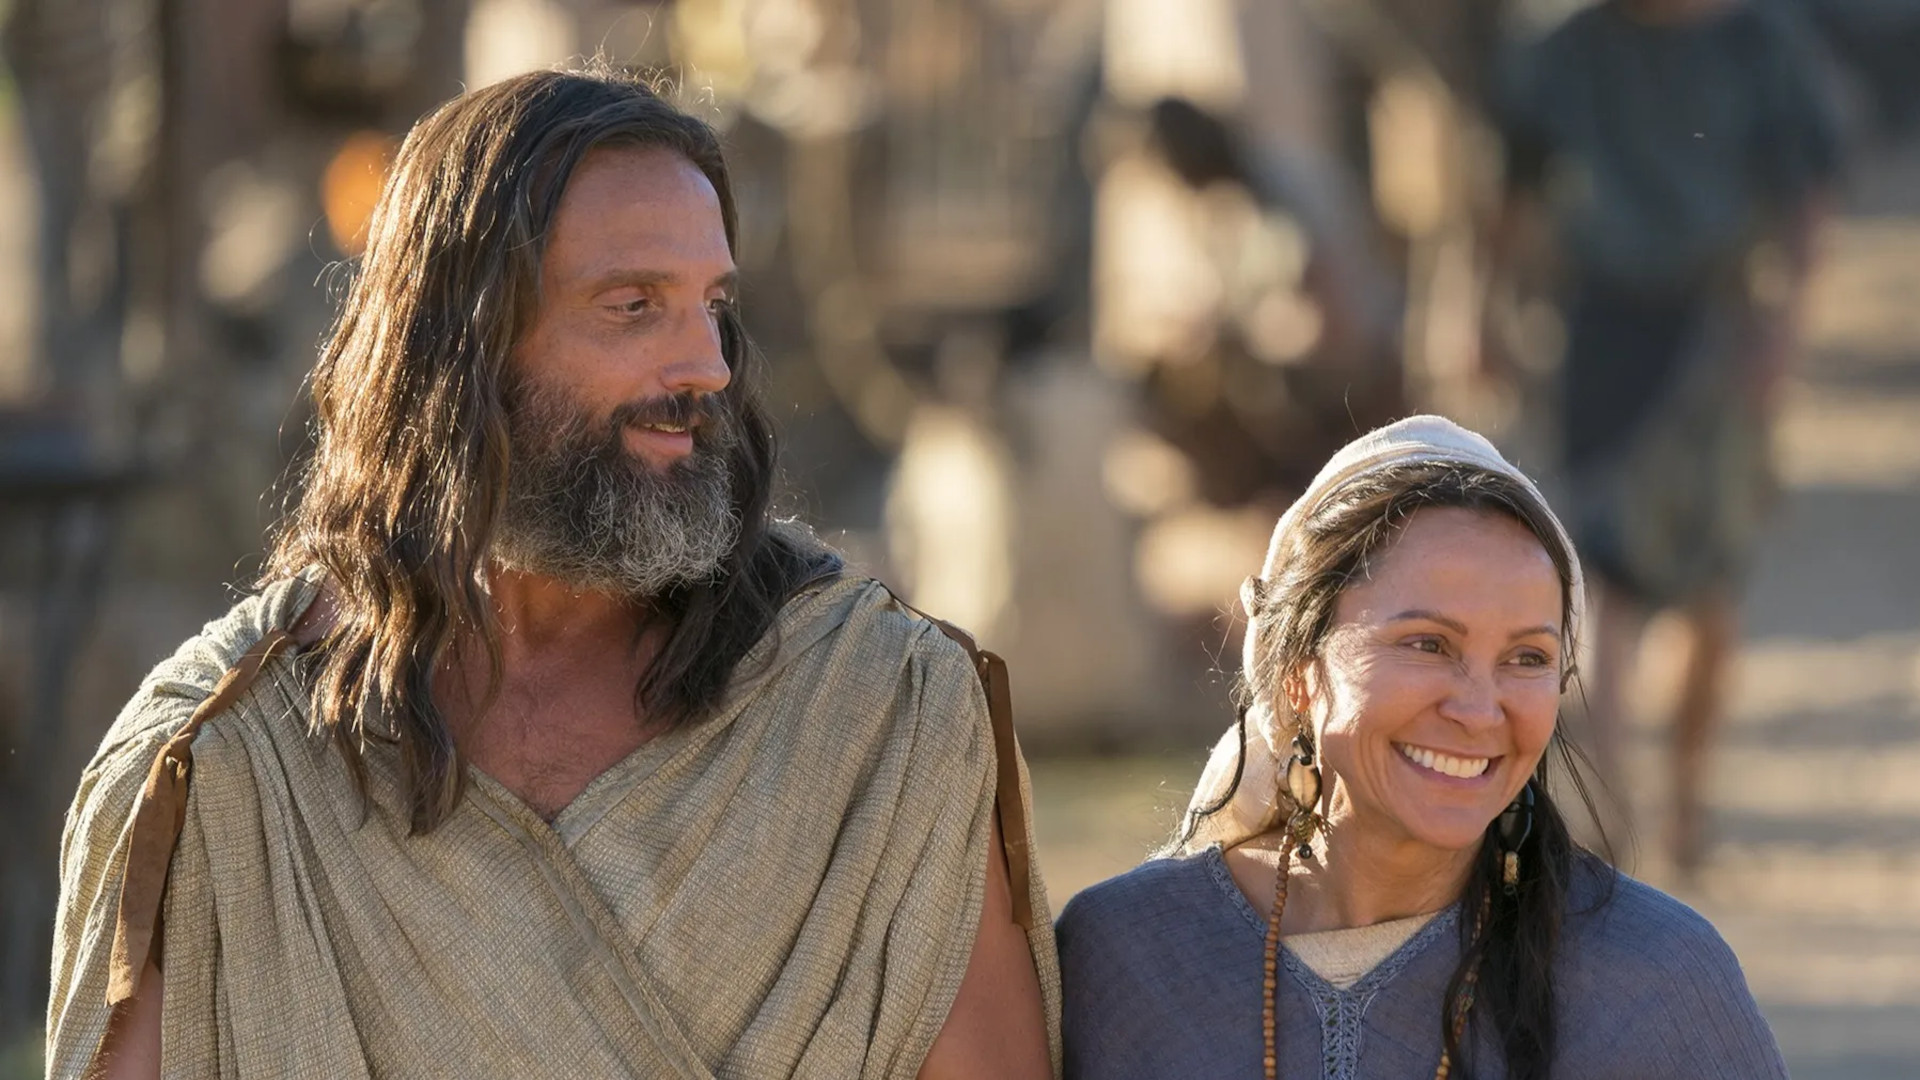 Nephi and his wife travel down a road in this still from the Book of Mormon Videos of The Church of Jesus Christ of Latter-day Saints.